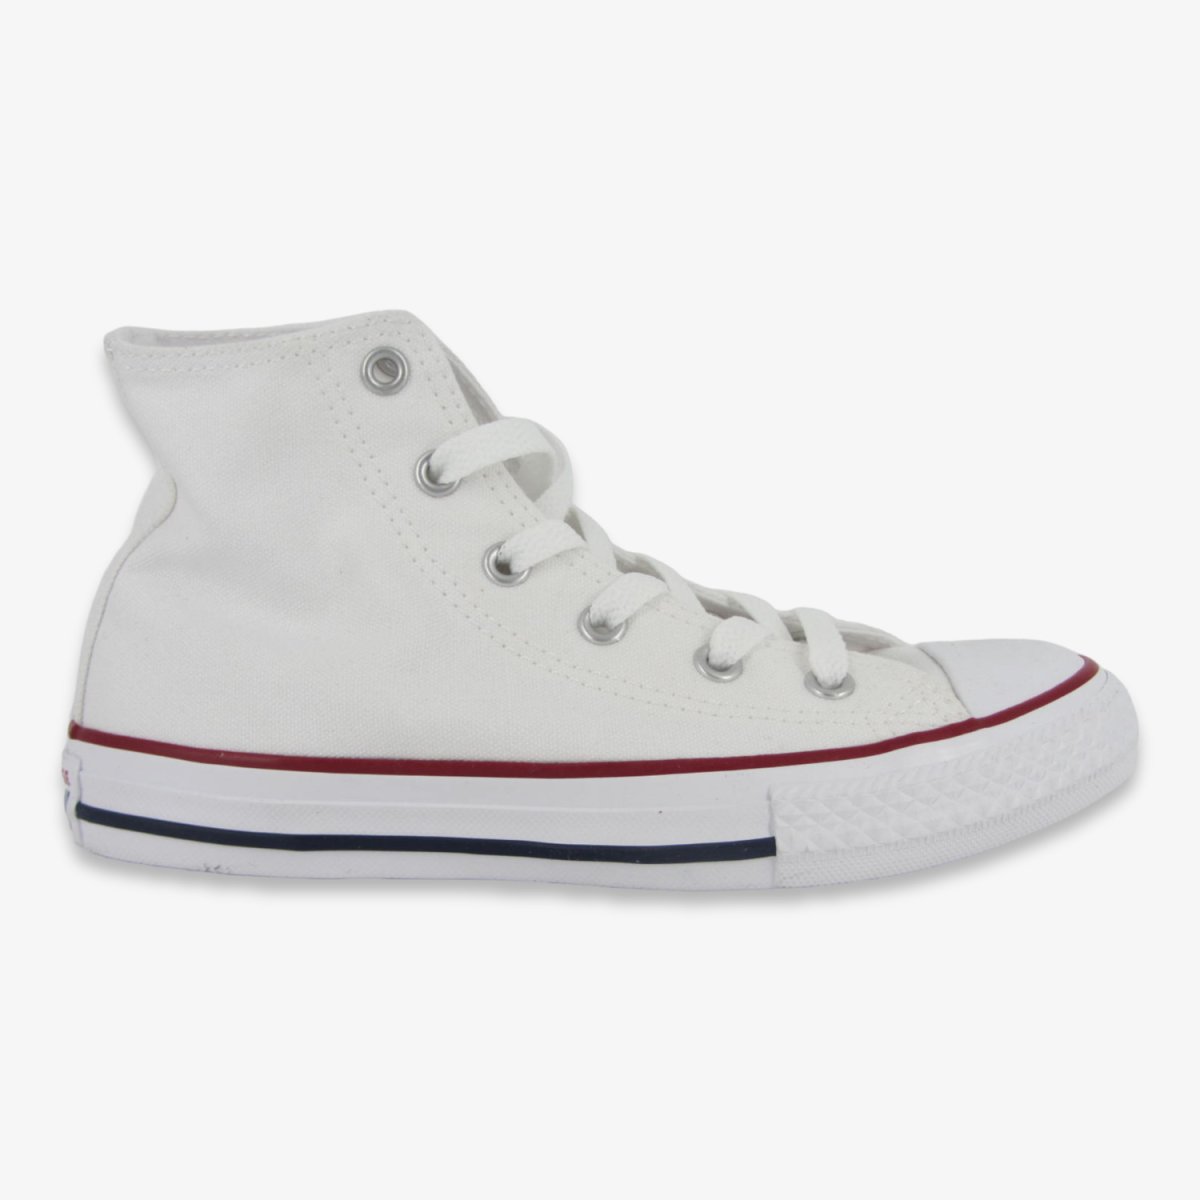 Chuck M7650 Taylor All Star Classic High Top